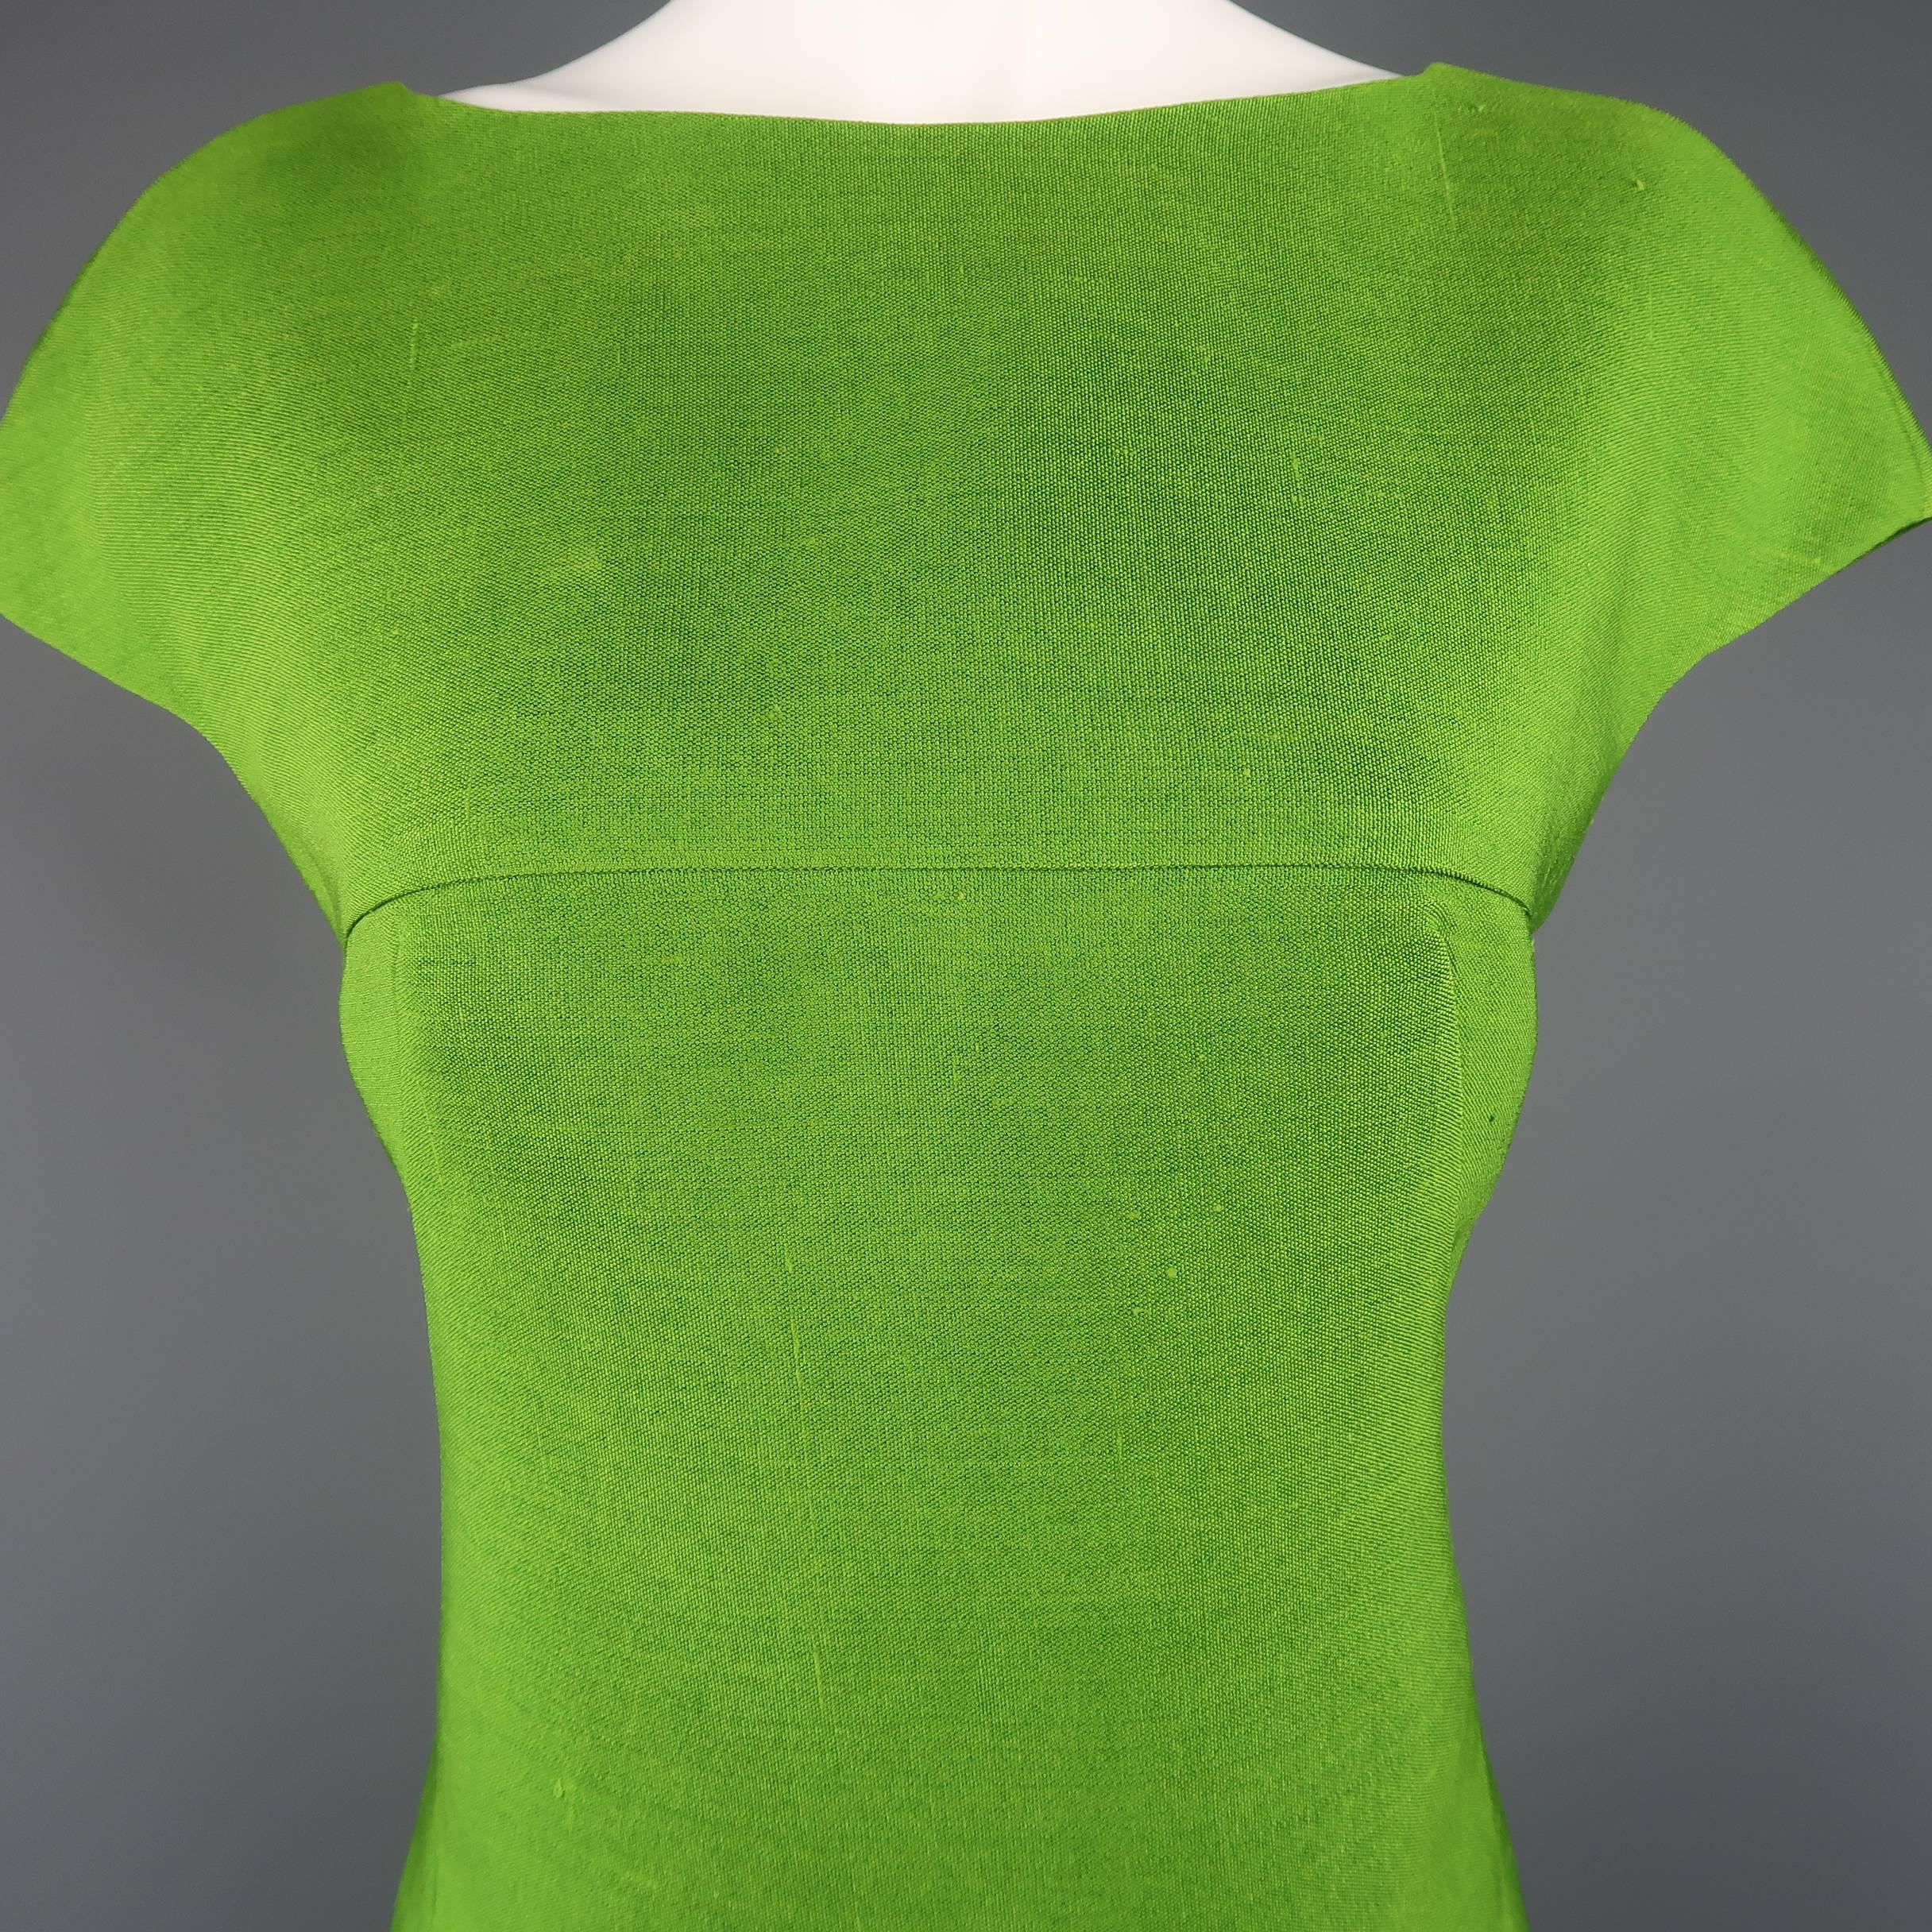 AKRIS shift dress comes in bold green silk canvas and features a high boat neck front, cap sleeves, and crossed V back. Looks great backwards as well. Made in Switzerland.
 
Good Pre-Owned Condition.
Marked: 8
 
Measurements:
 
Shoulder: 17